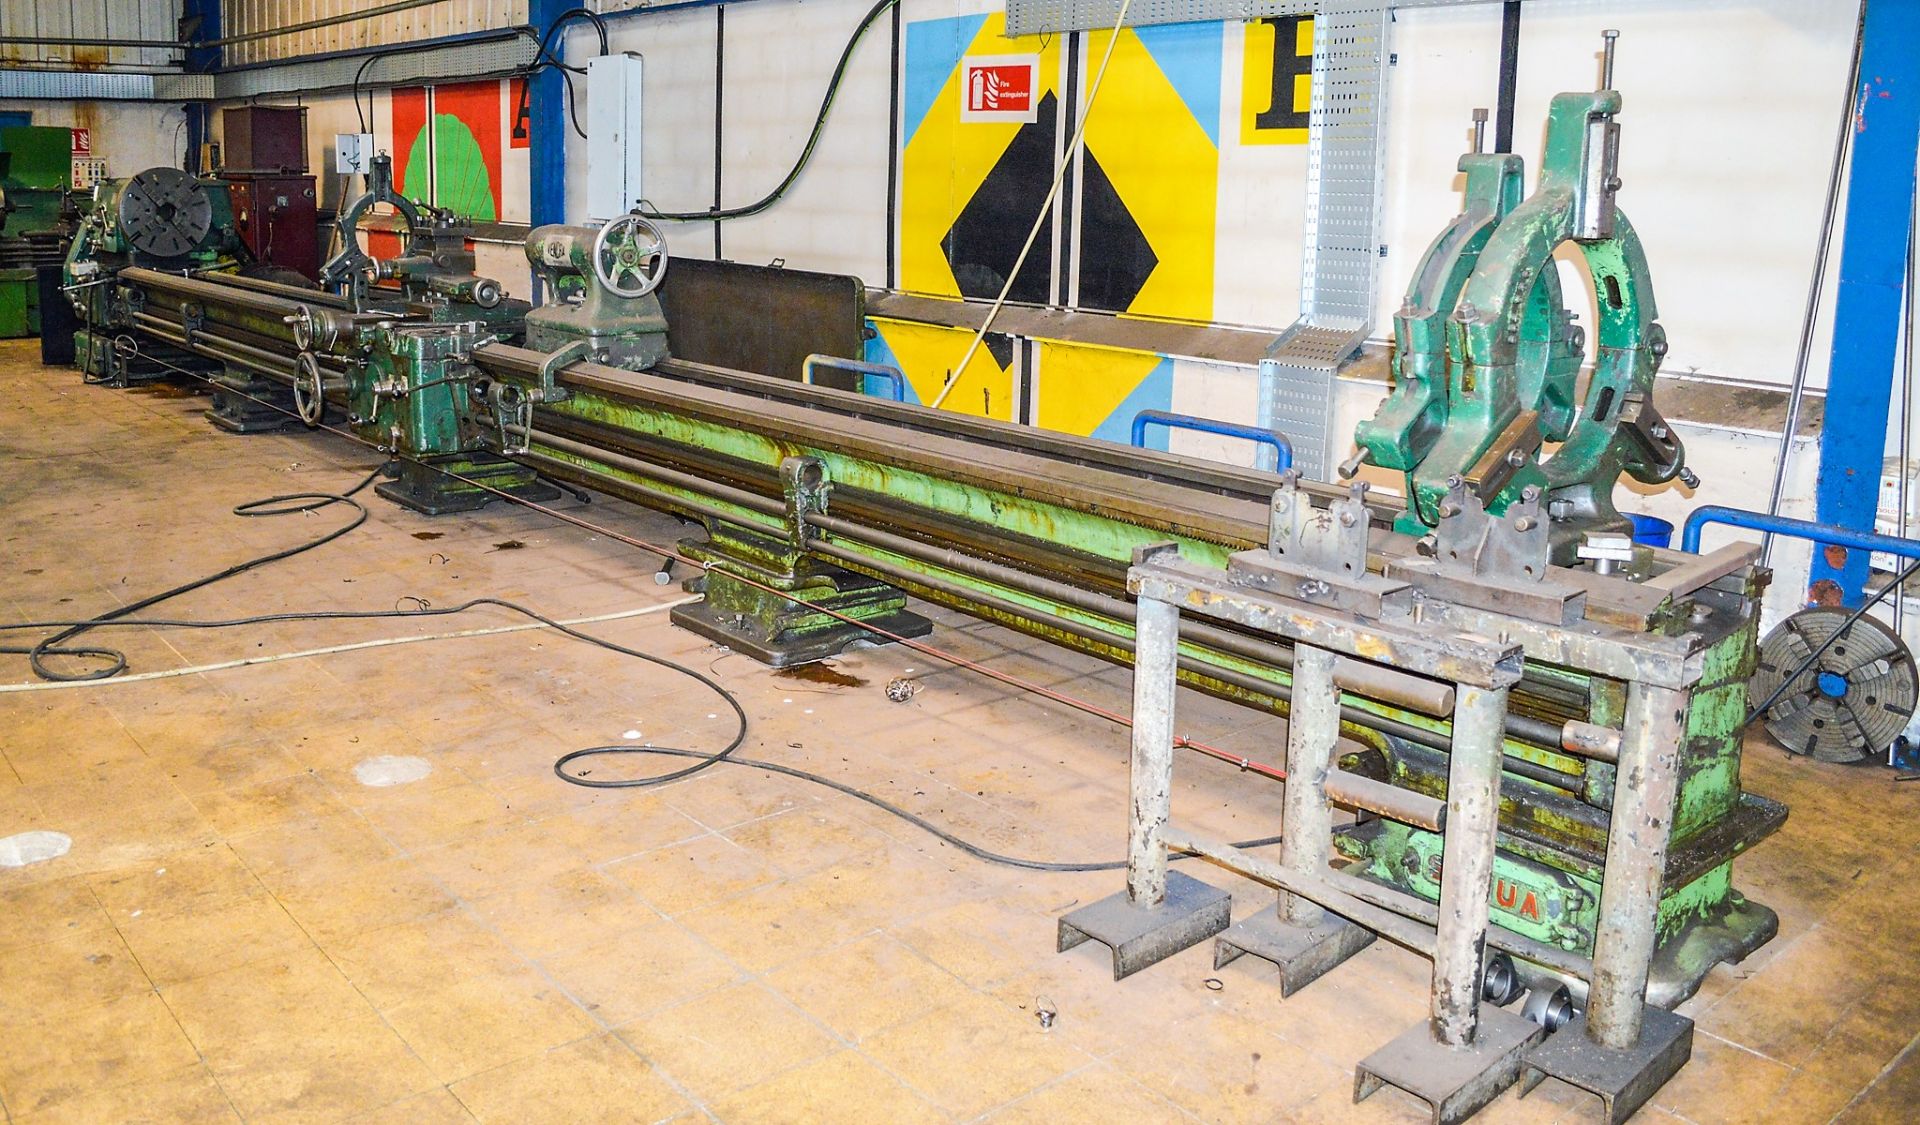 Somua straight bed centre lathe 15 inch swing over bed, 31 foot between centres c/w 3 - fixed - Image 2 of 5